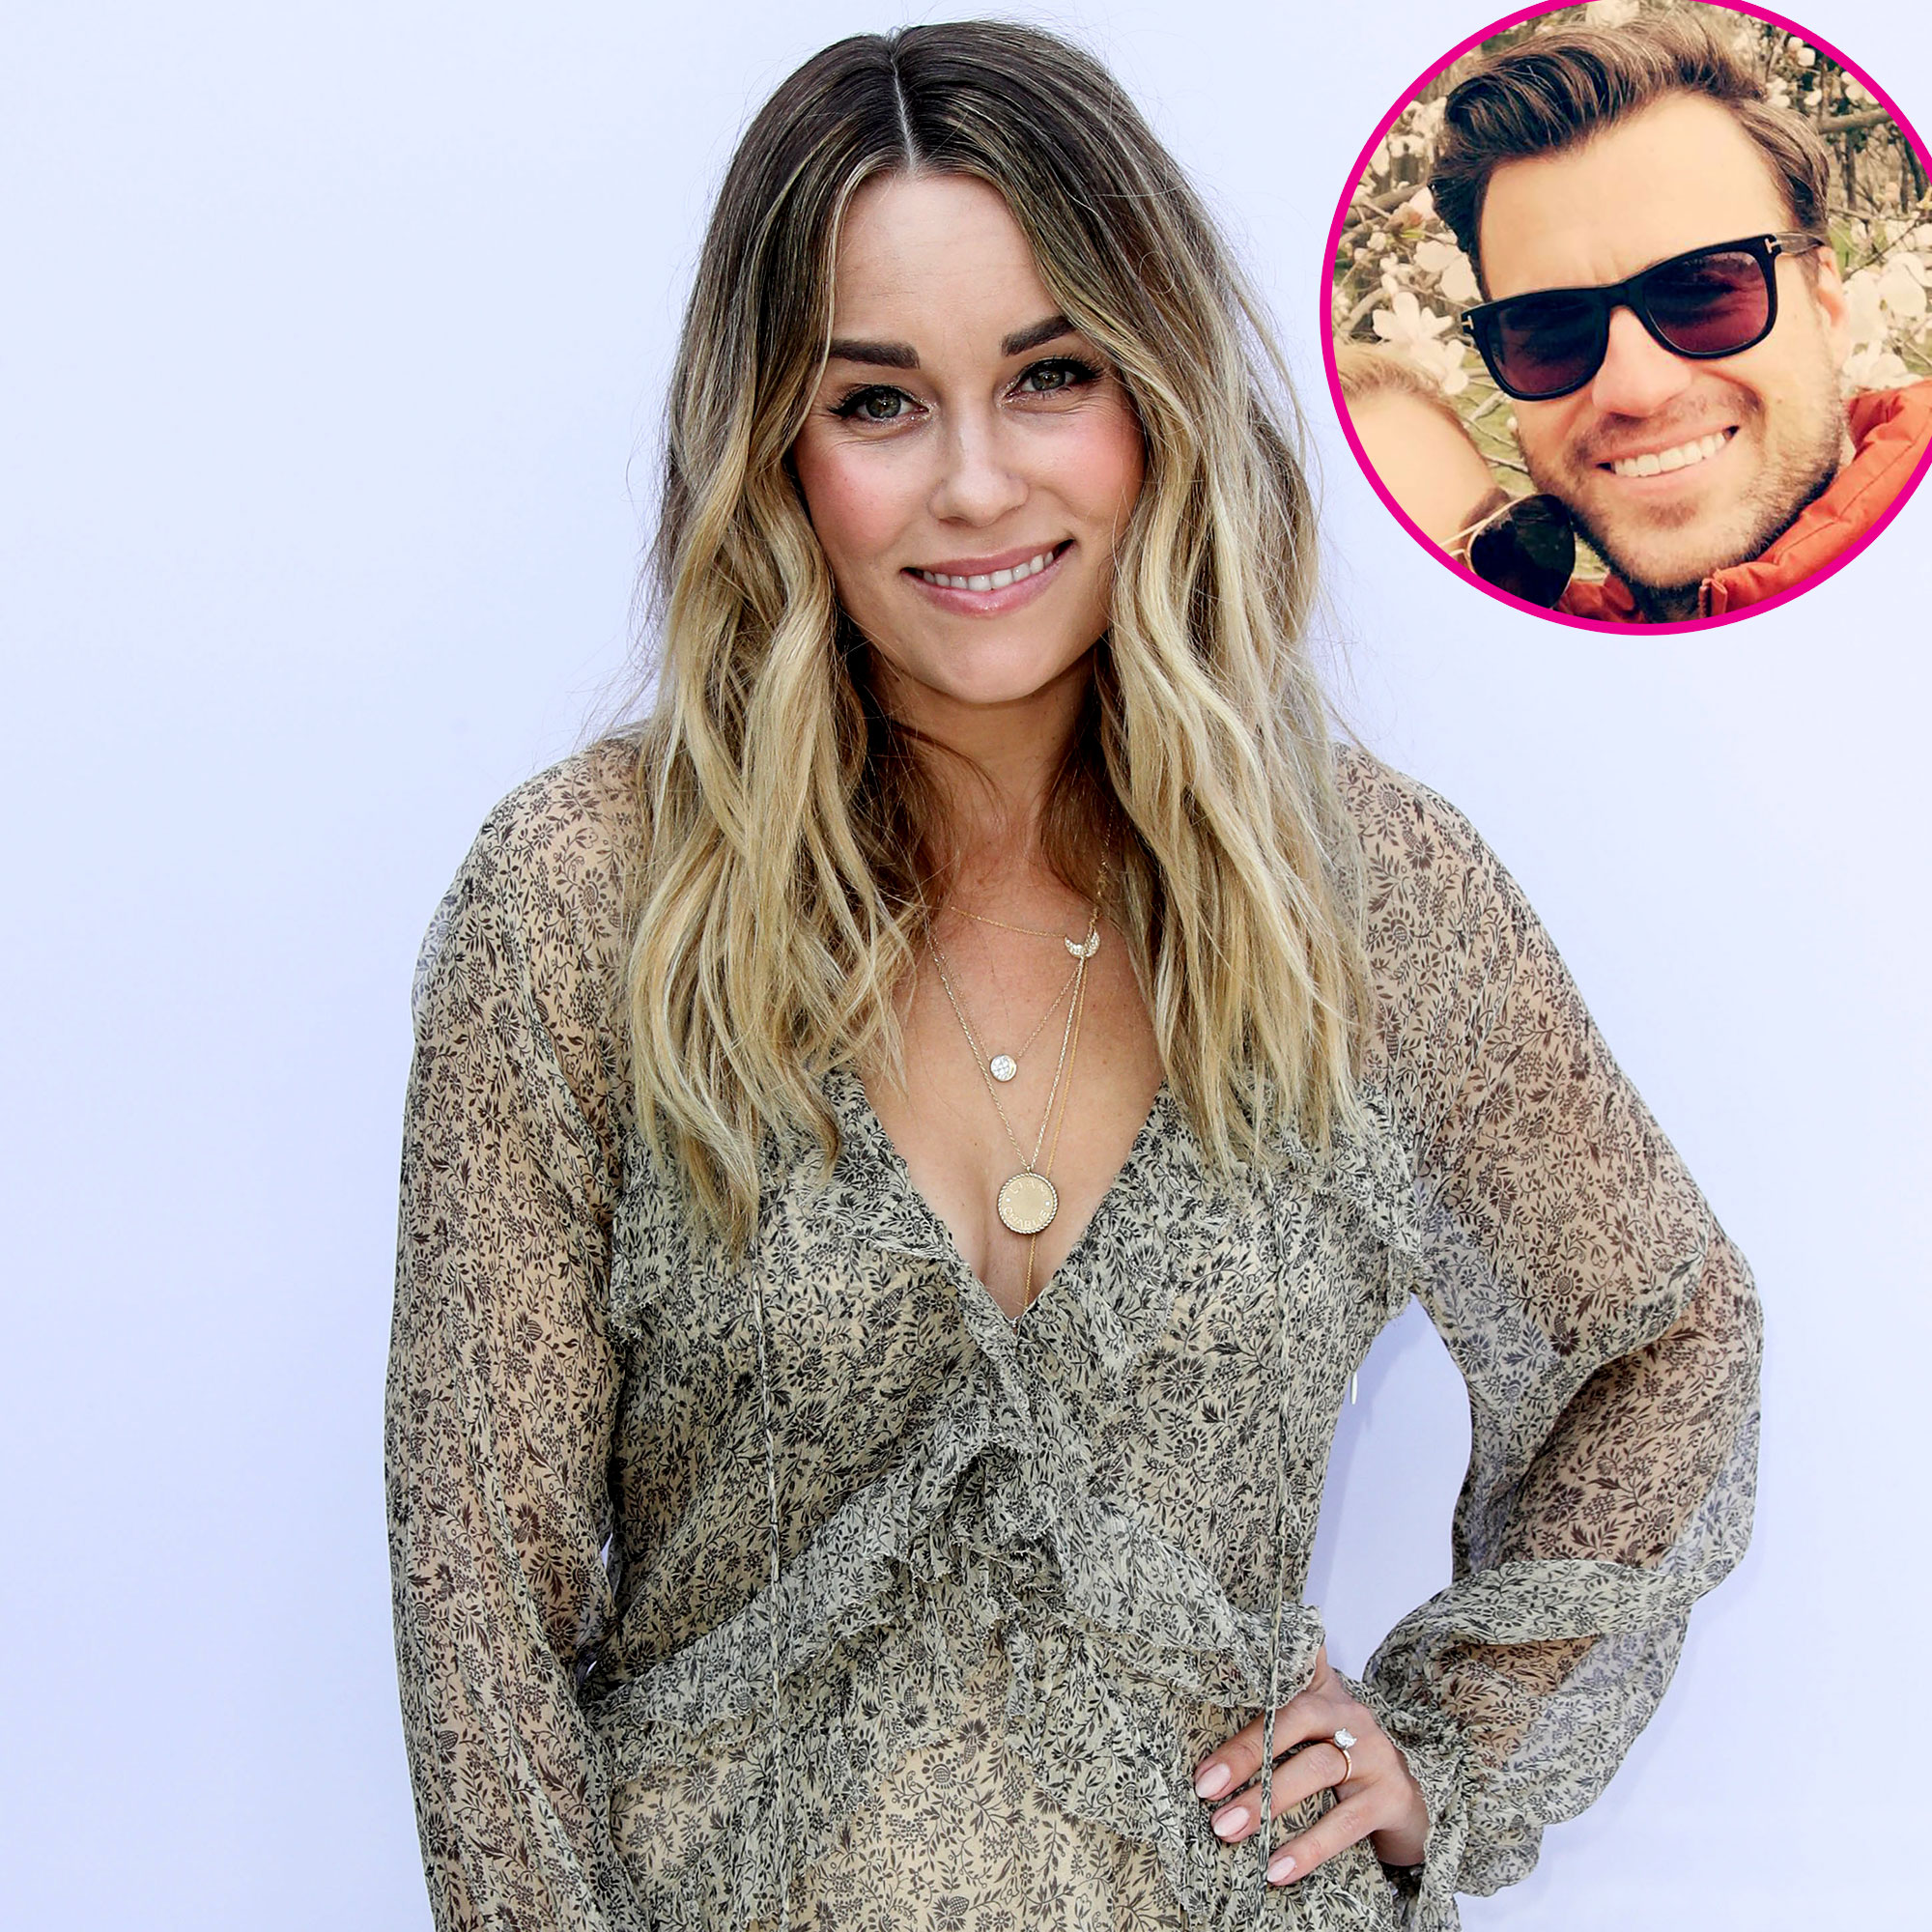 Lauren Conrad Reveals She and Husband William Tell Have No Plans